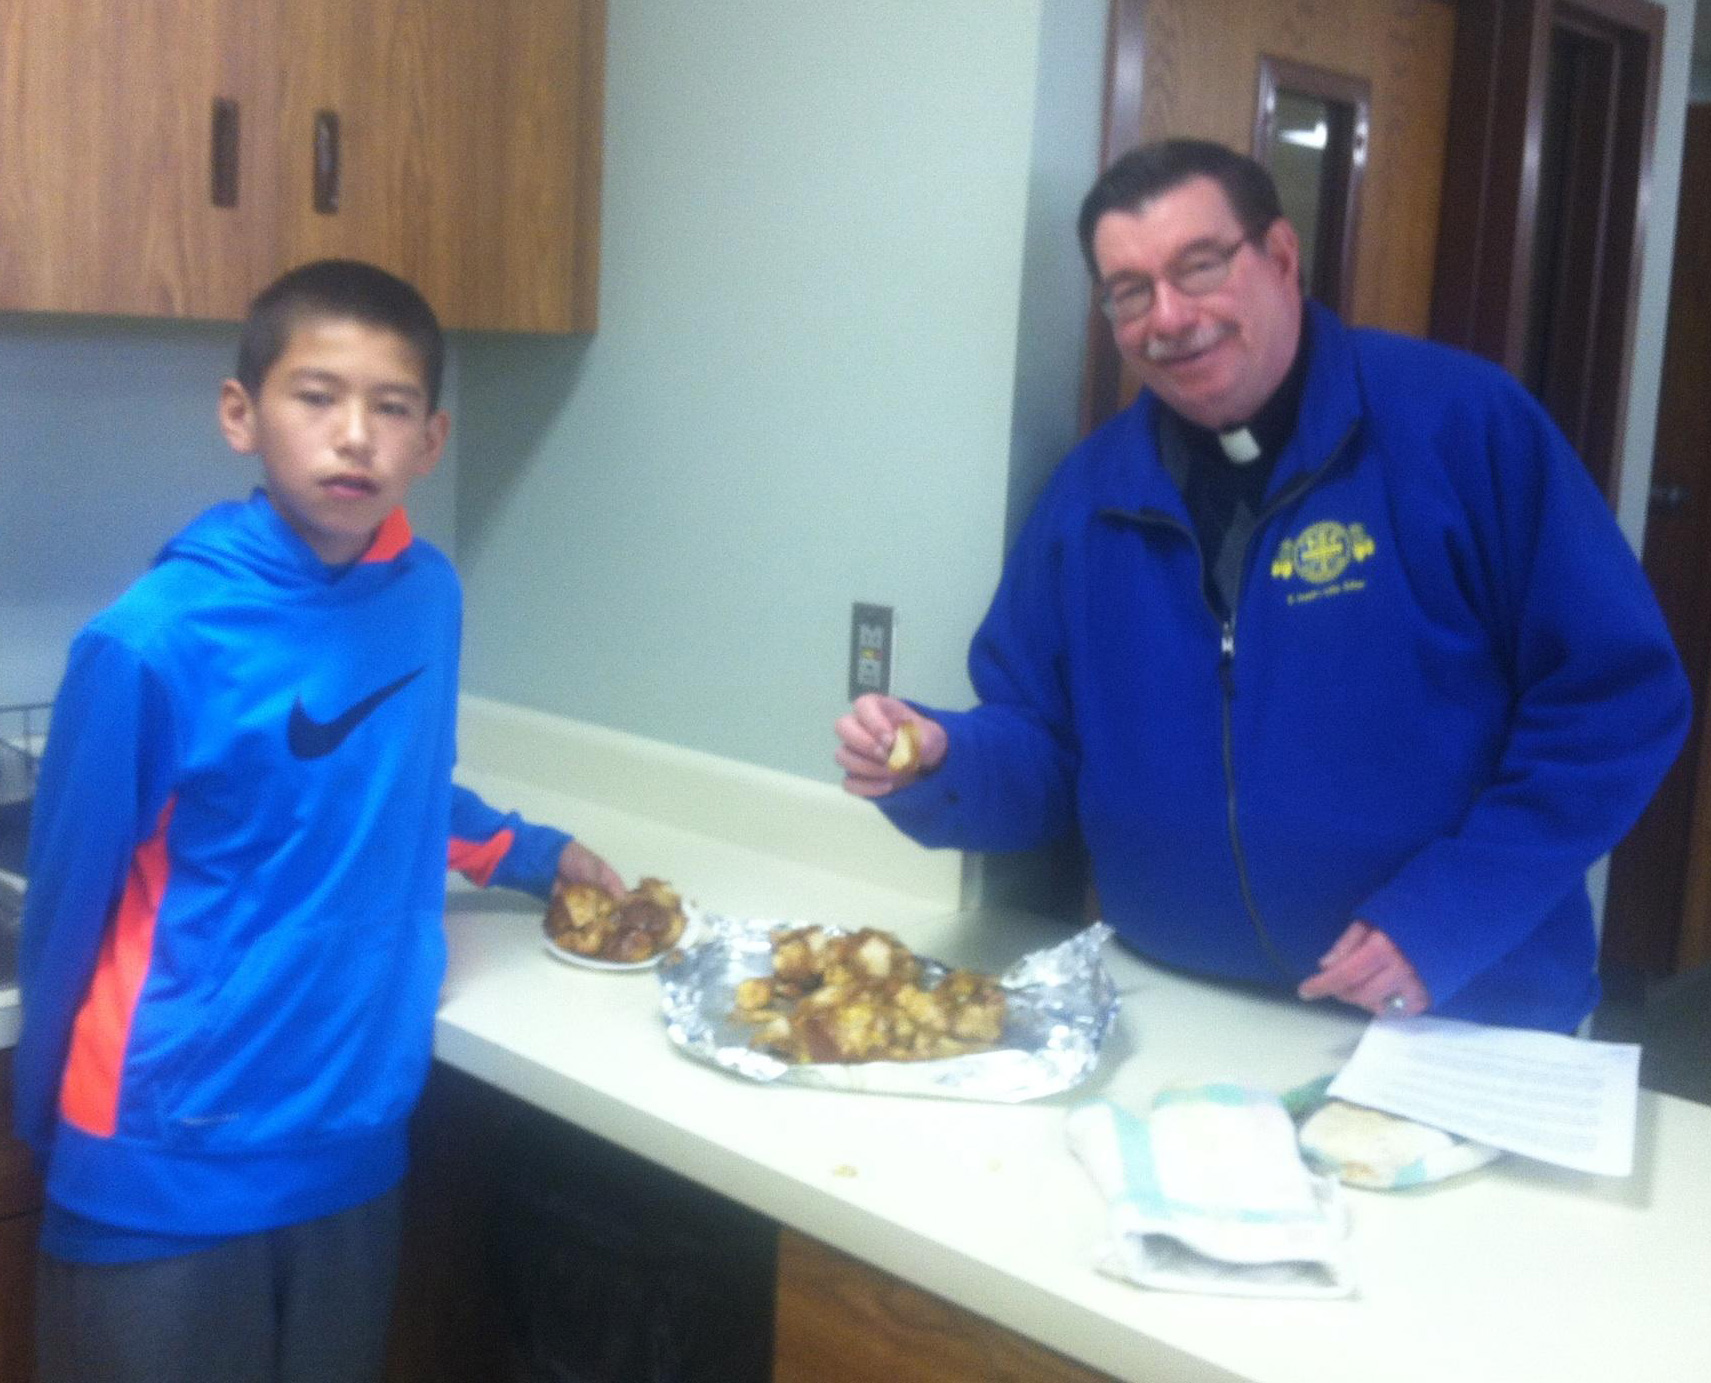 Fr. Anthony sampled the monkey bread the sixth graders were baking in class. 